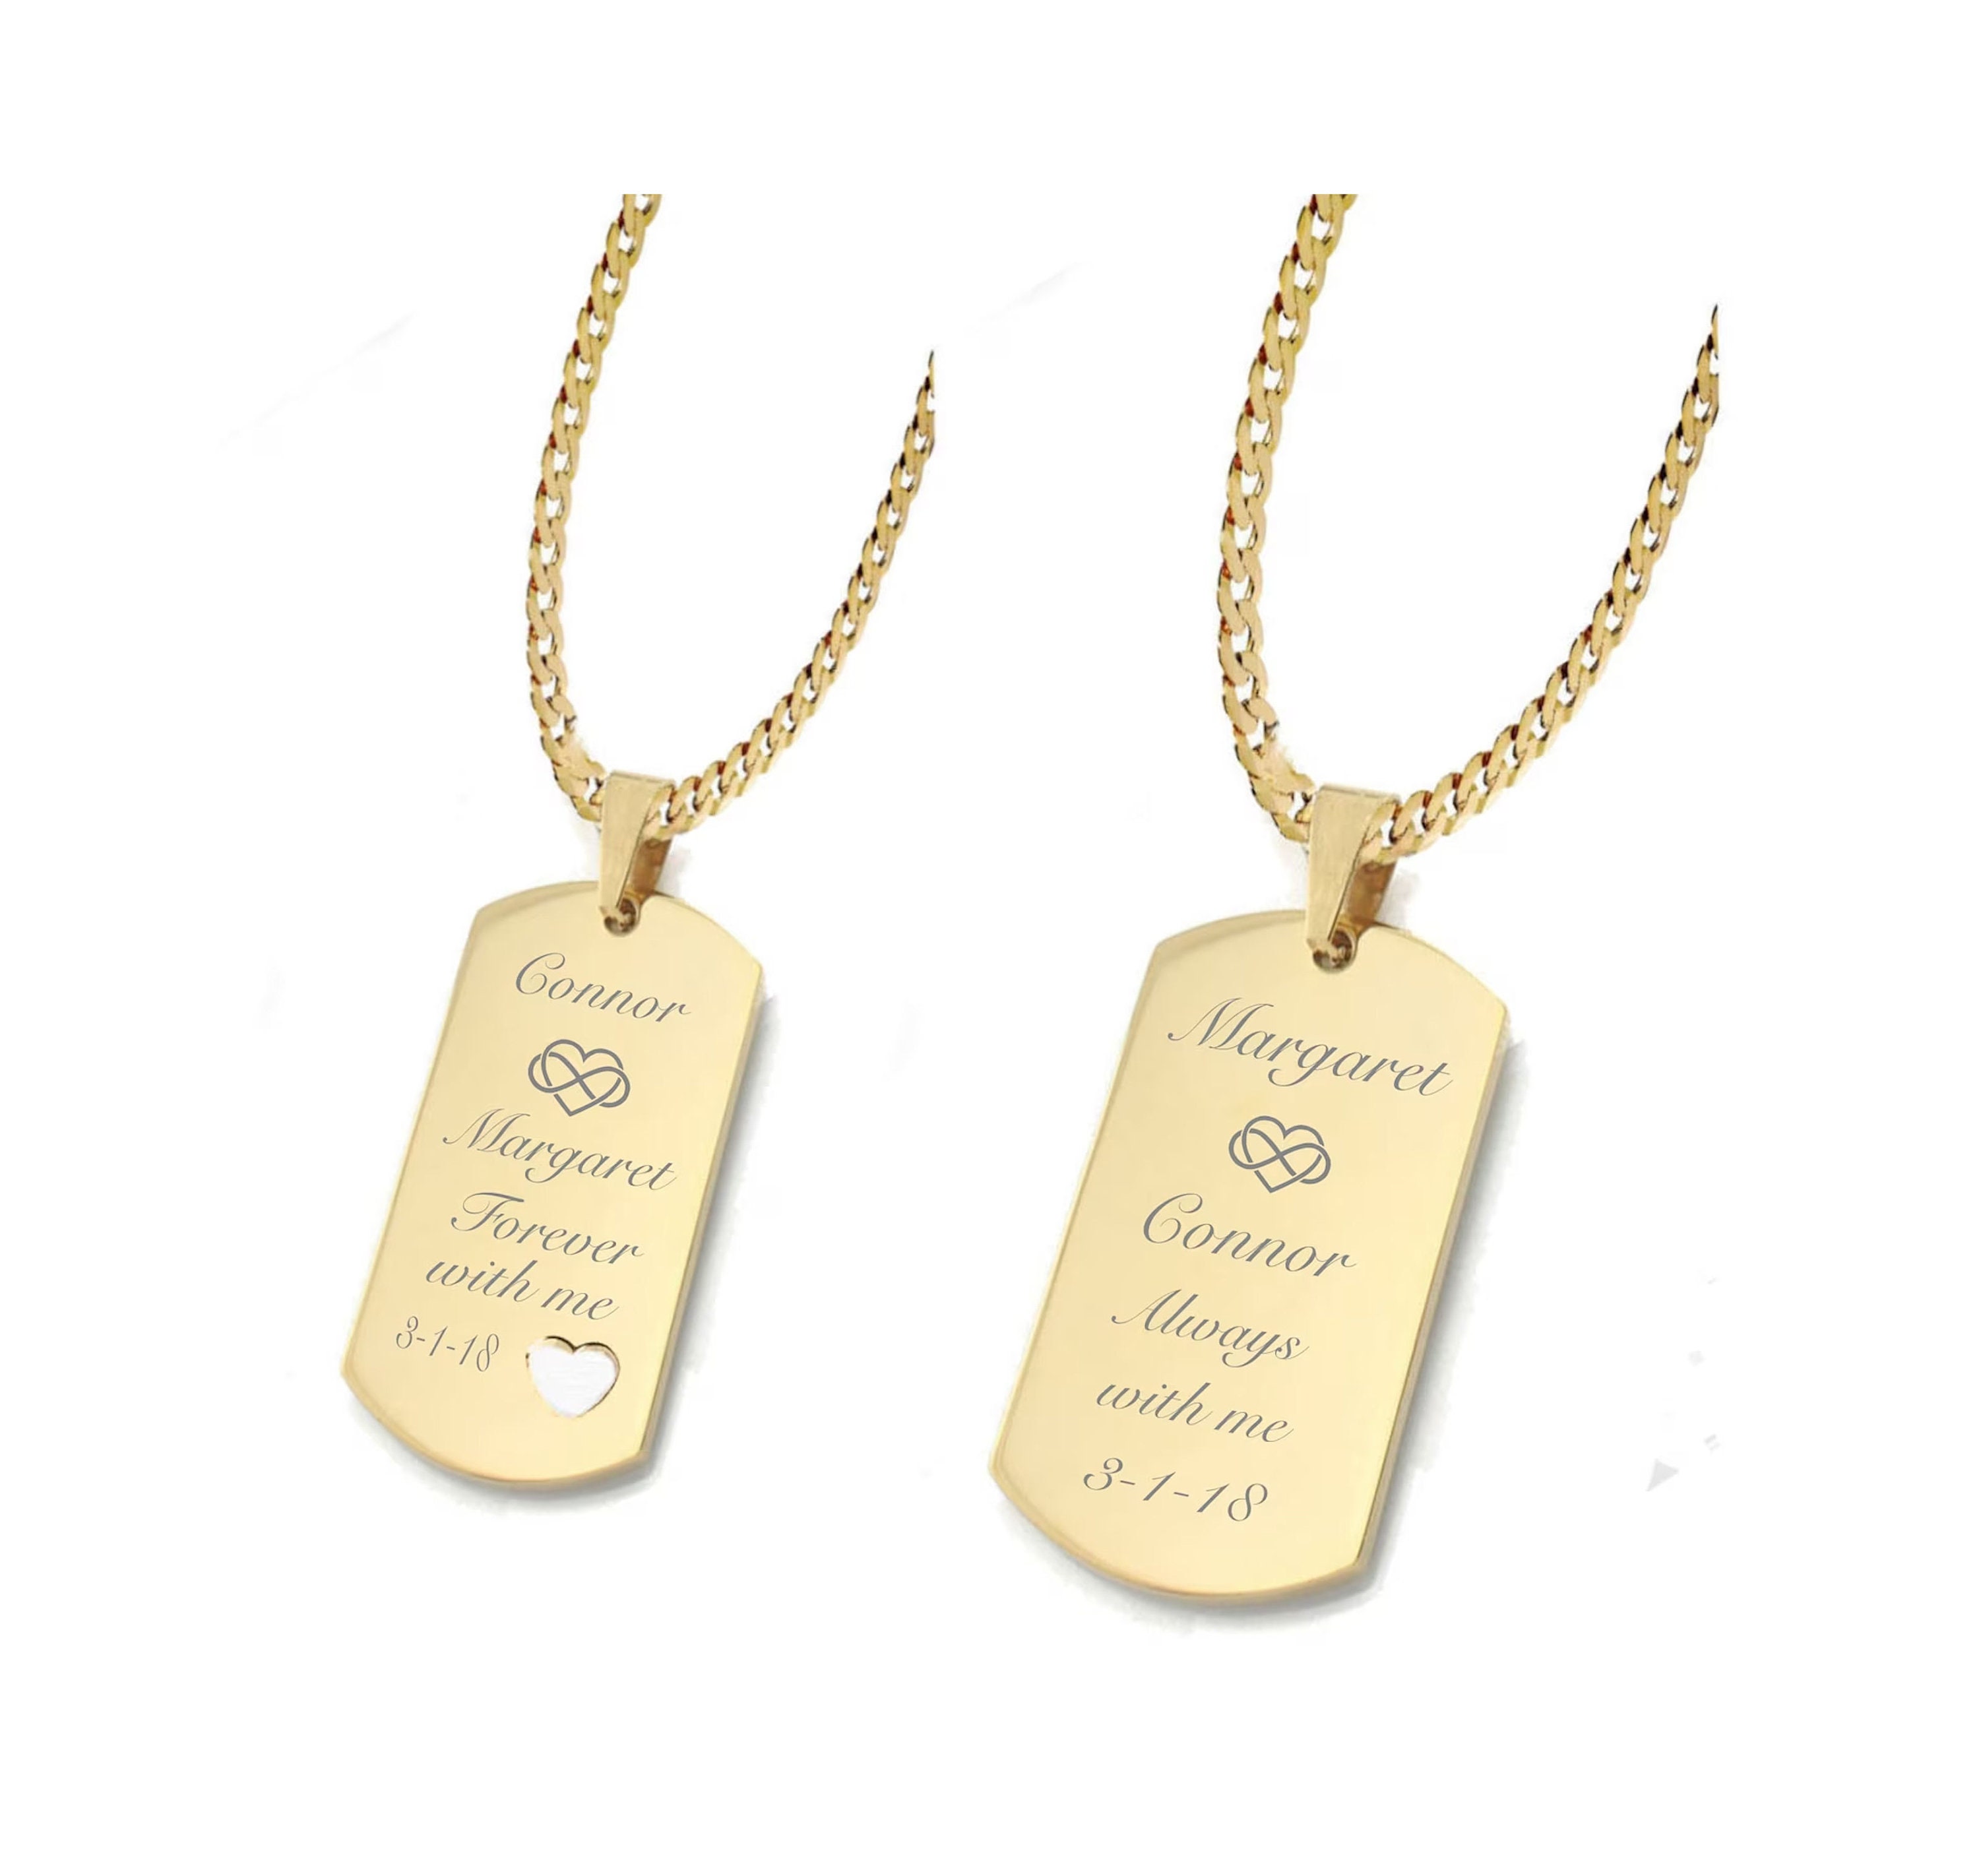 Carry Your Heart with Me Dog Tag and Ring Set in Rose Gold Plating by oNecklace